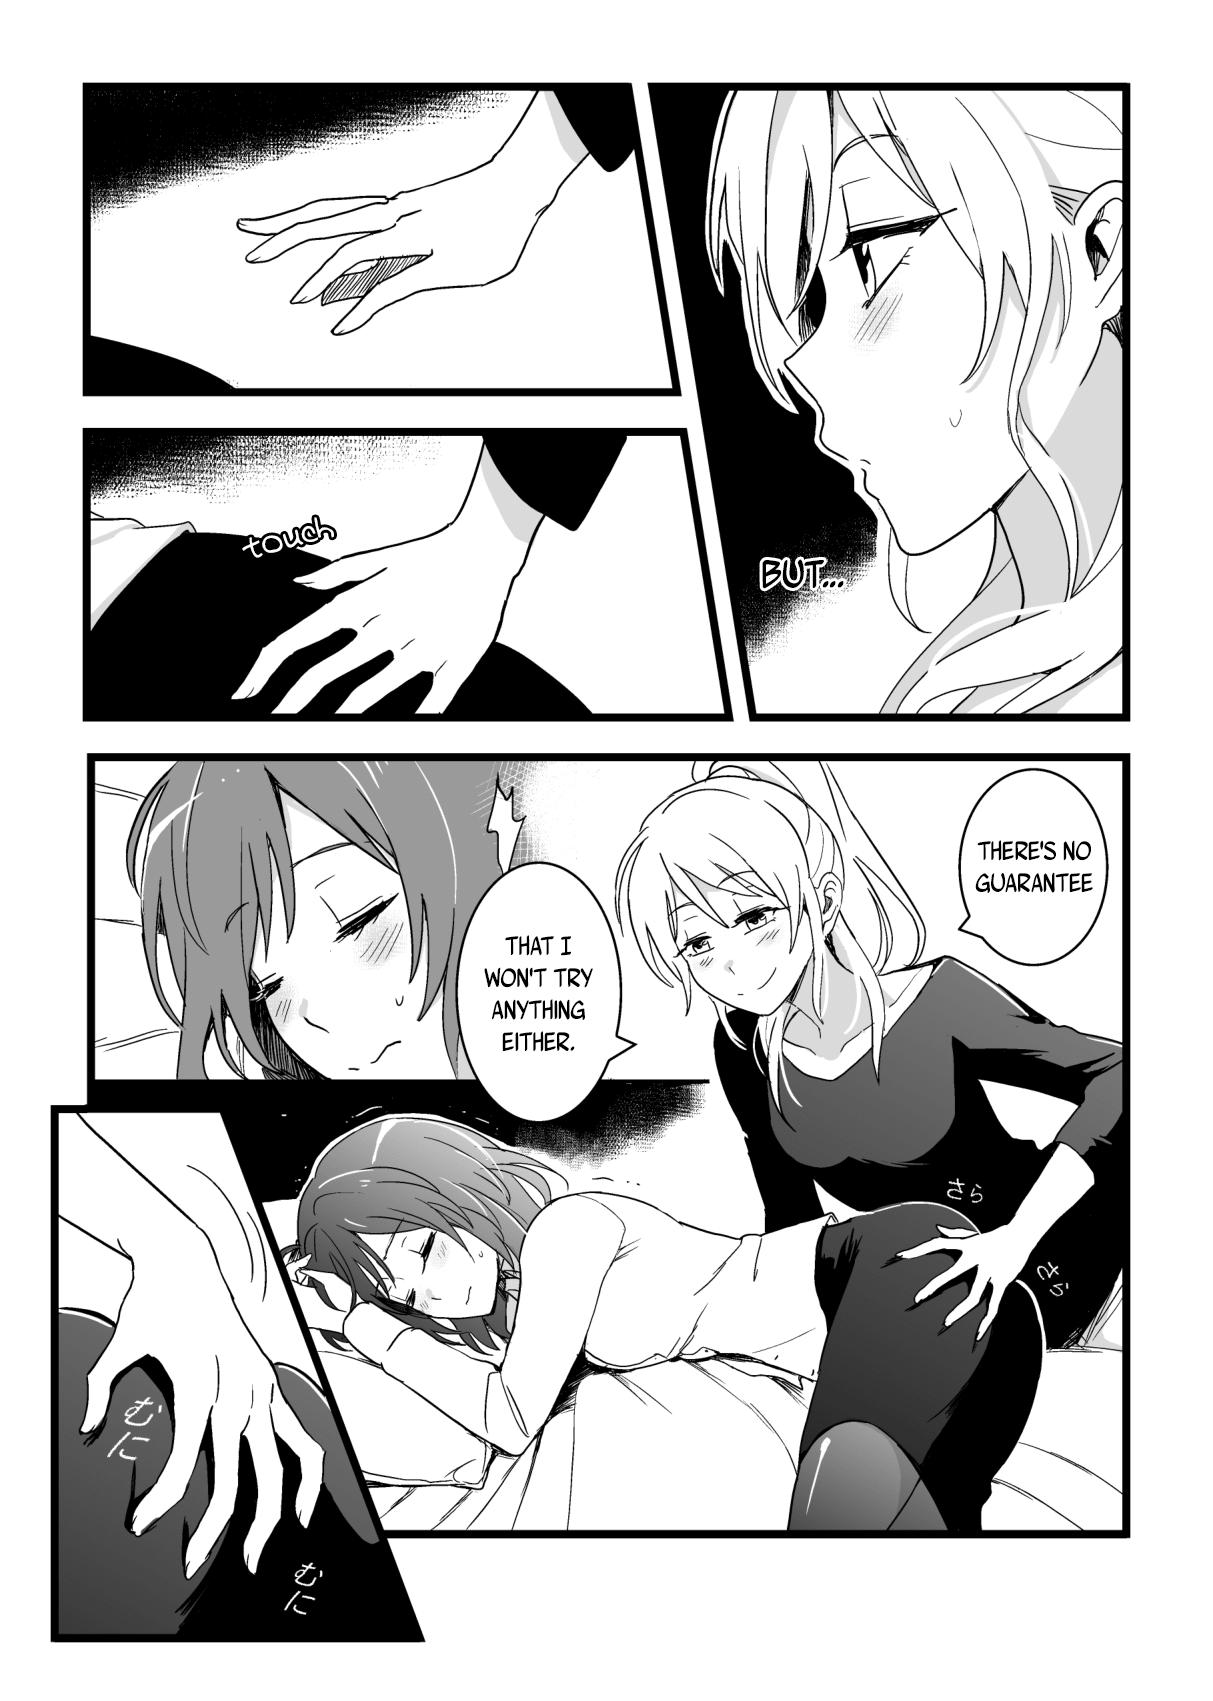 Chacal Kaito Carnival Night - Love live Women Sucking - Page 5